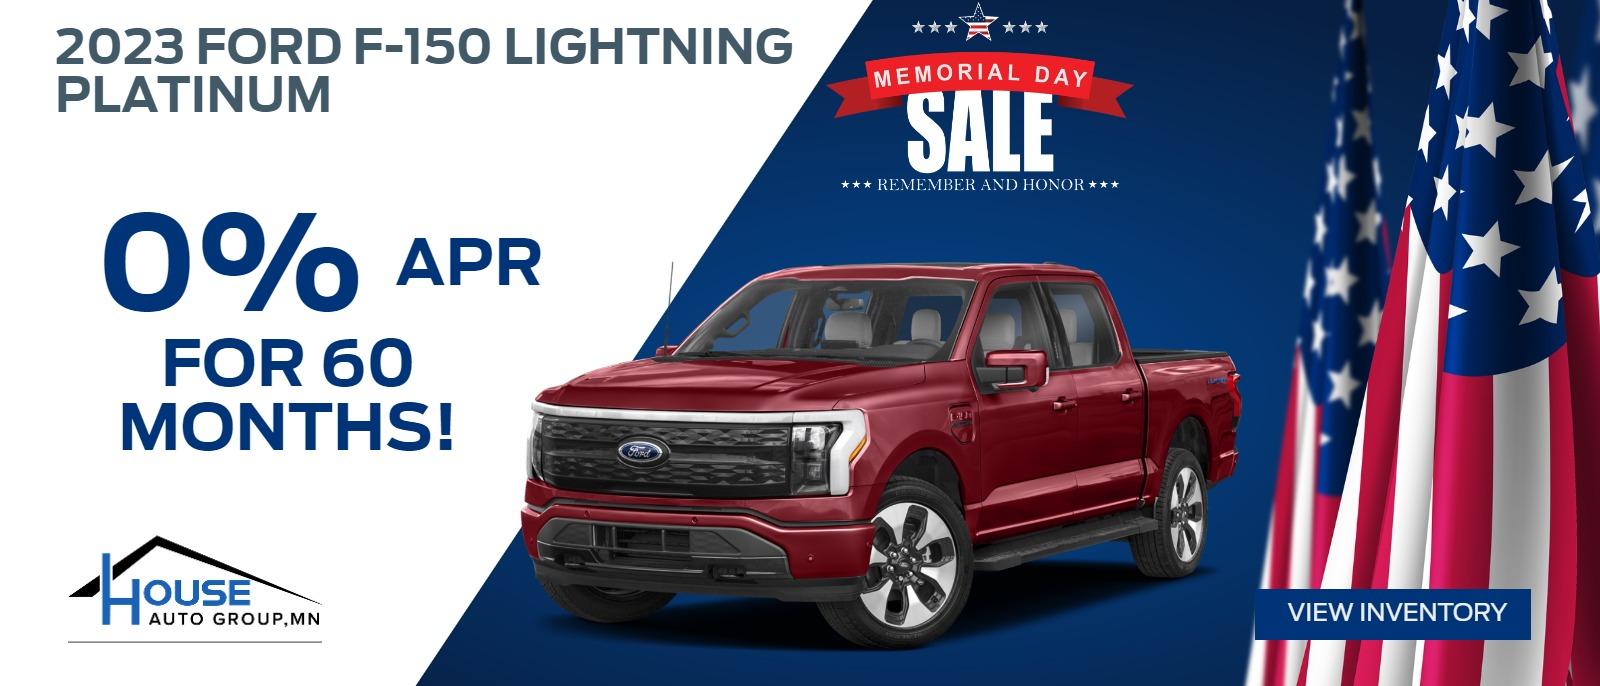 2023 Ford F-150 Lightning Platinum -- 3.9% APR / 60 Months Or $12,500 Off MSRP! (APR offer is for qualified buyers financing with Ford Credit, exp. 6/03)